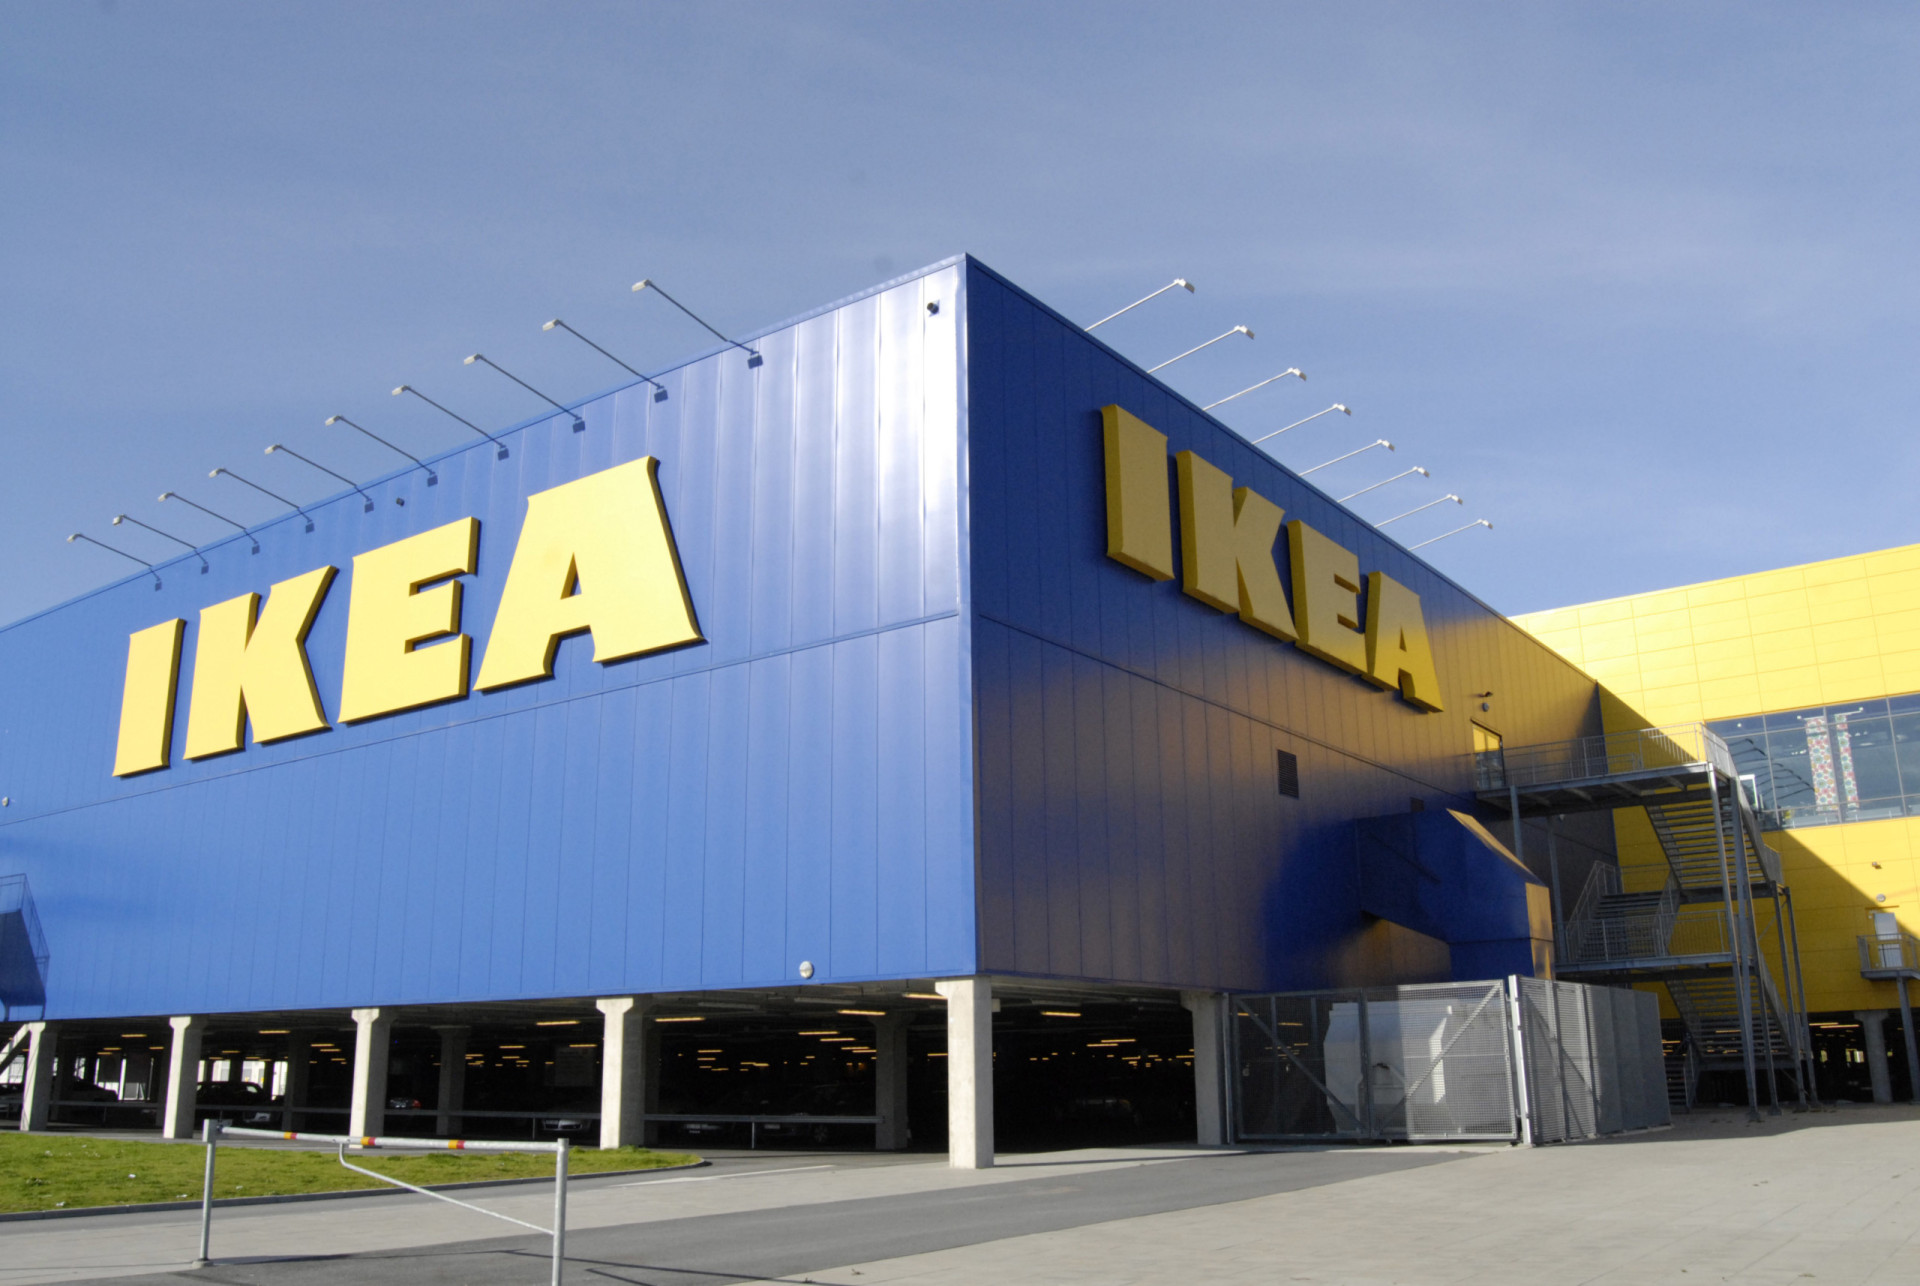 <p><span>Levis and IKEA are </span><span>great examples</span><span> of Everyman brands. They tend to be very generalized and have a strong focus on community and belonging. </span></p><p>You may also like:<a href="https://www.starsinsider.com/n/429391?utm_source=msn.com&utm_medium=display&utm_campaign=referral_description&utm_content=691040en-us"> What happens to your body when you don't sleep enough</a></p>